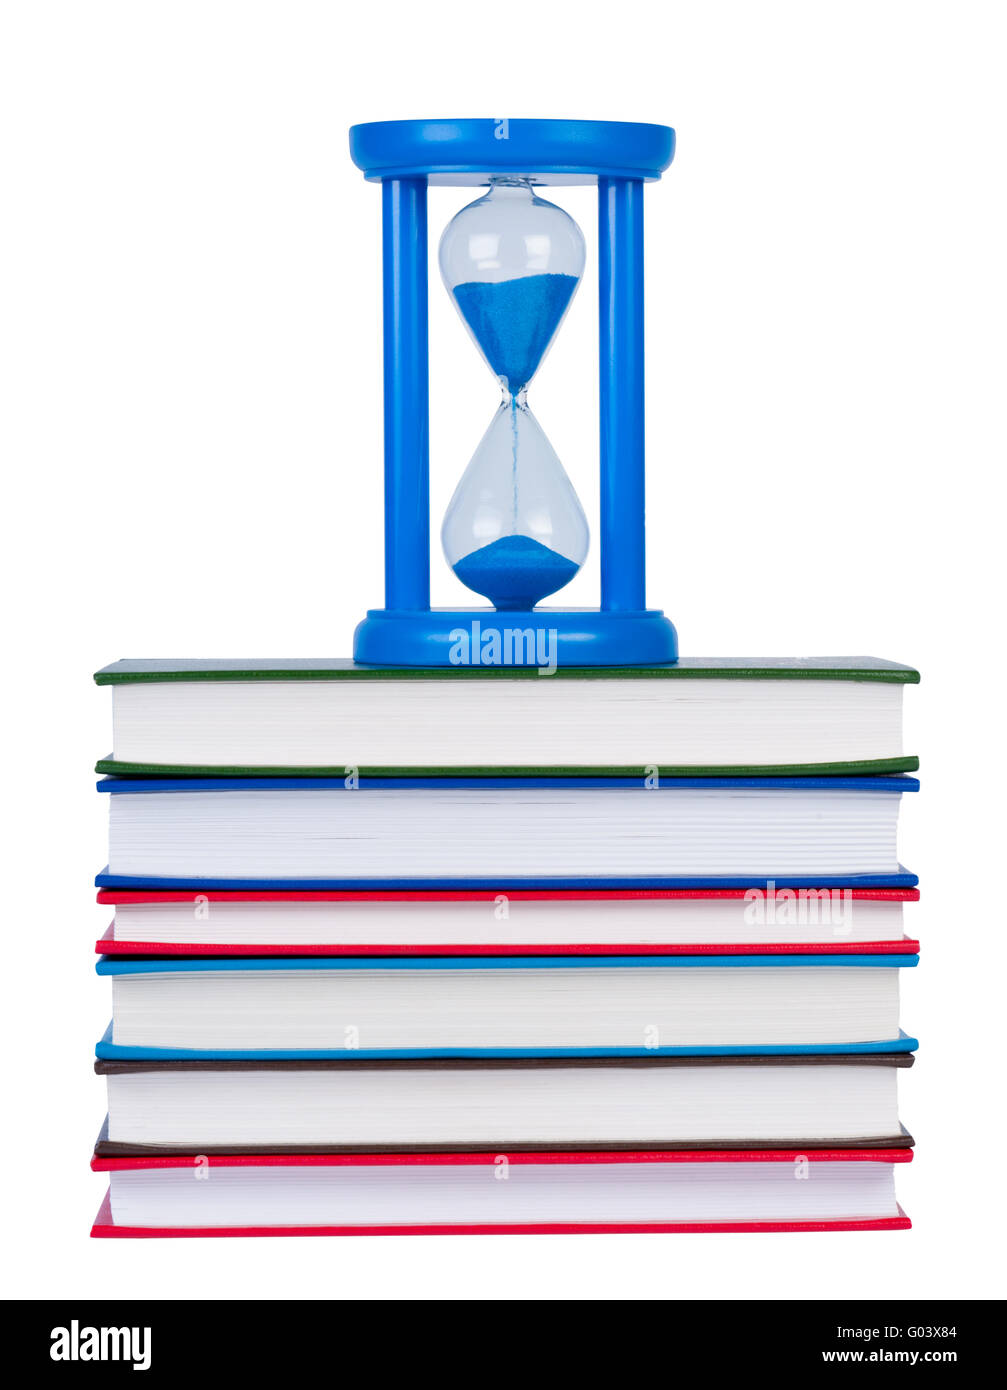 Hourglass on pile of books isolated on white background. Stock Photo